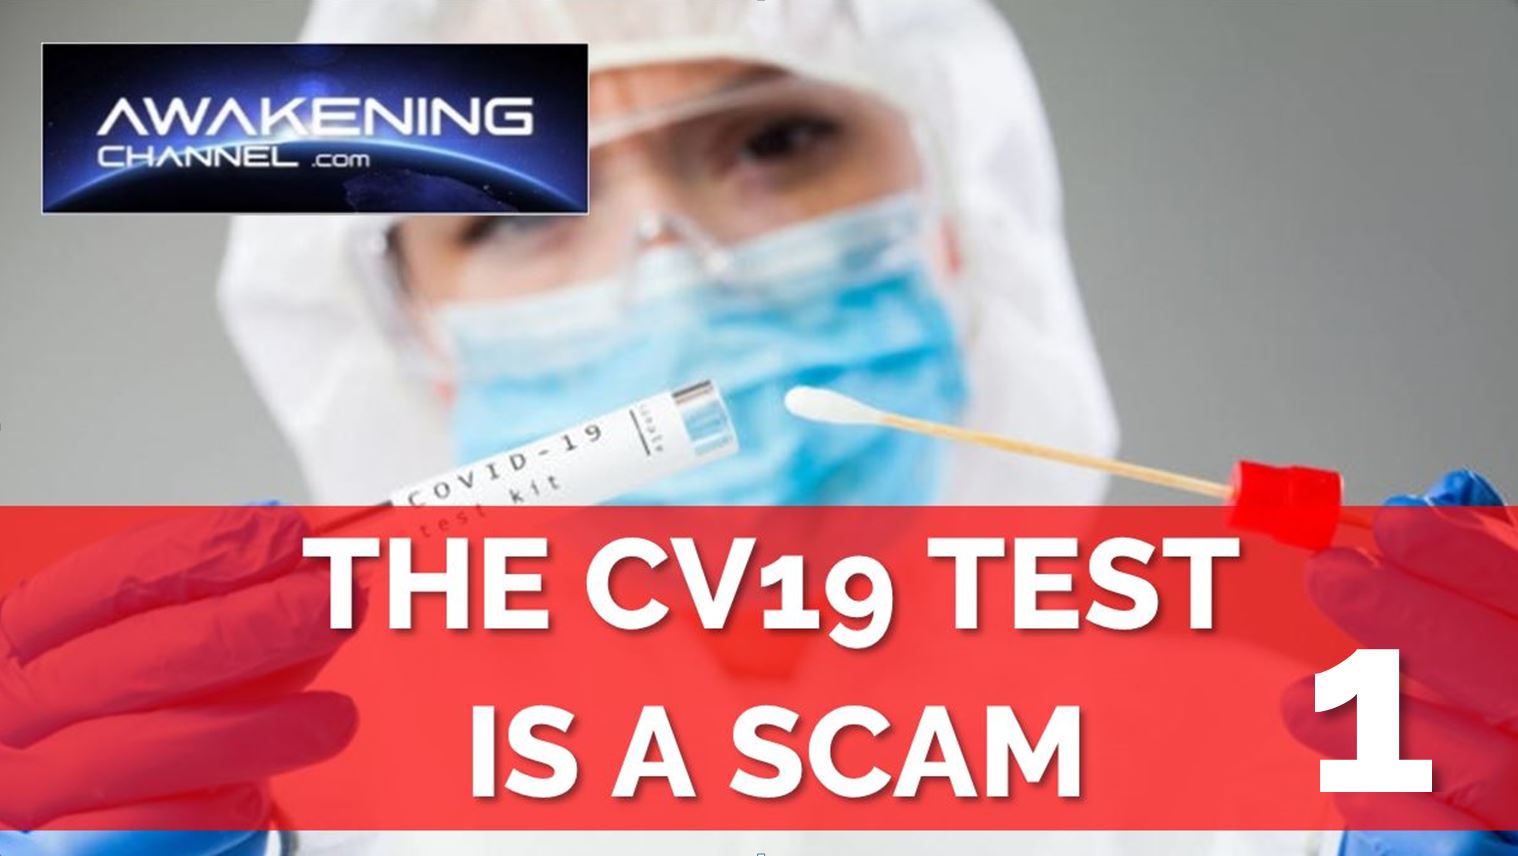 (Part 1/4) THE CV19 TEST IS A SCAM